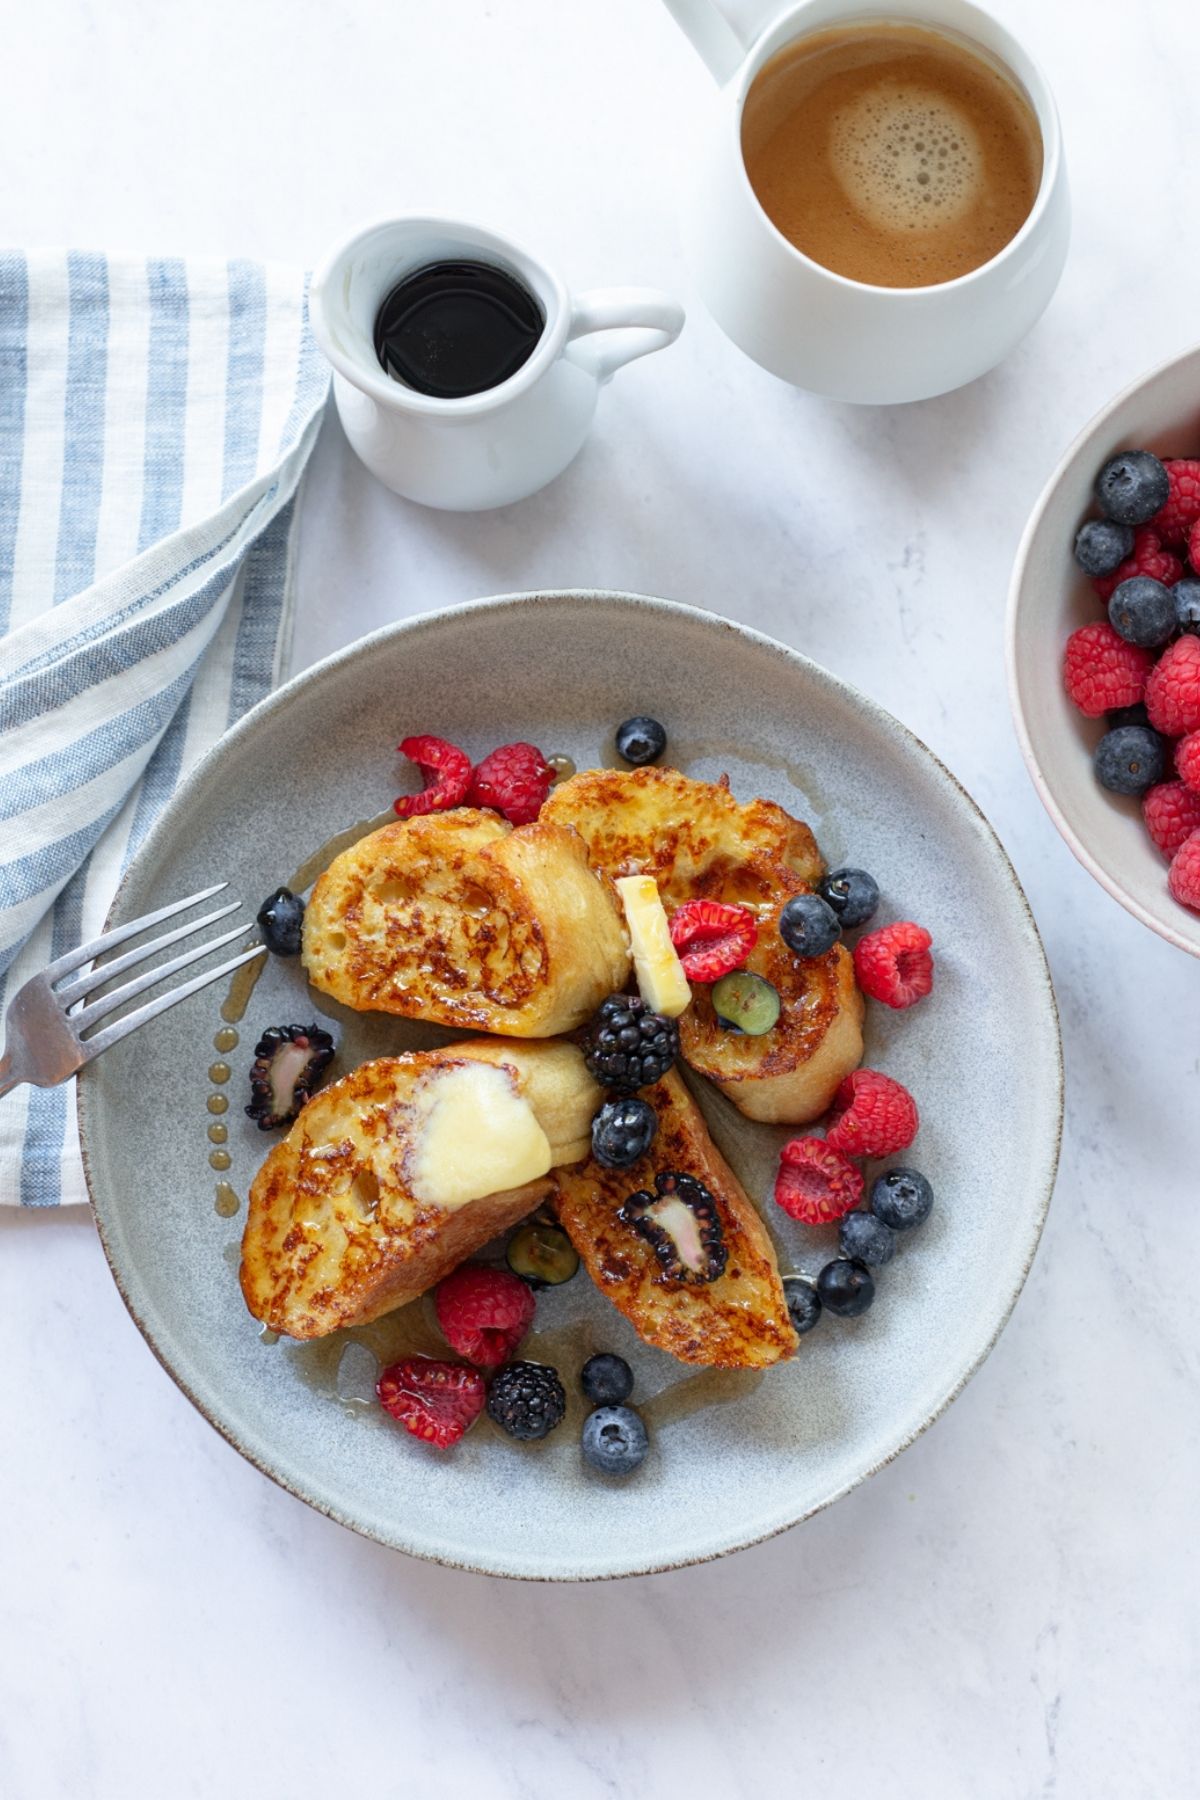 French toast served with berries, butter and coffee.